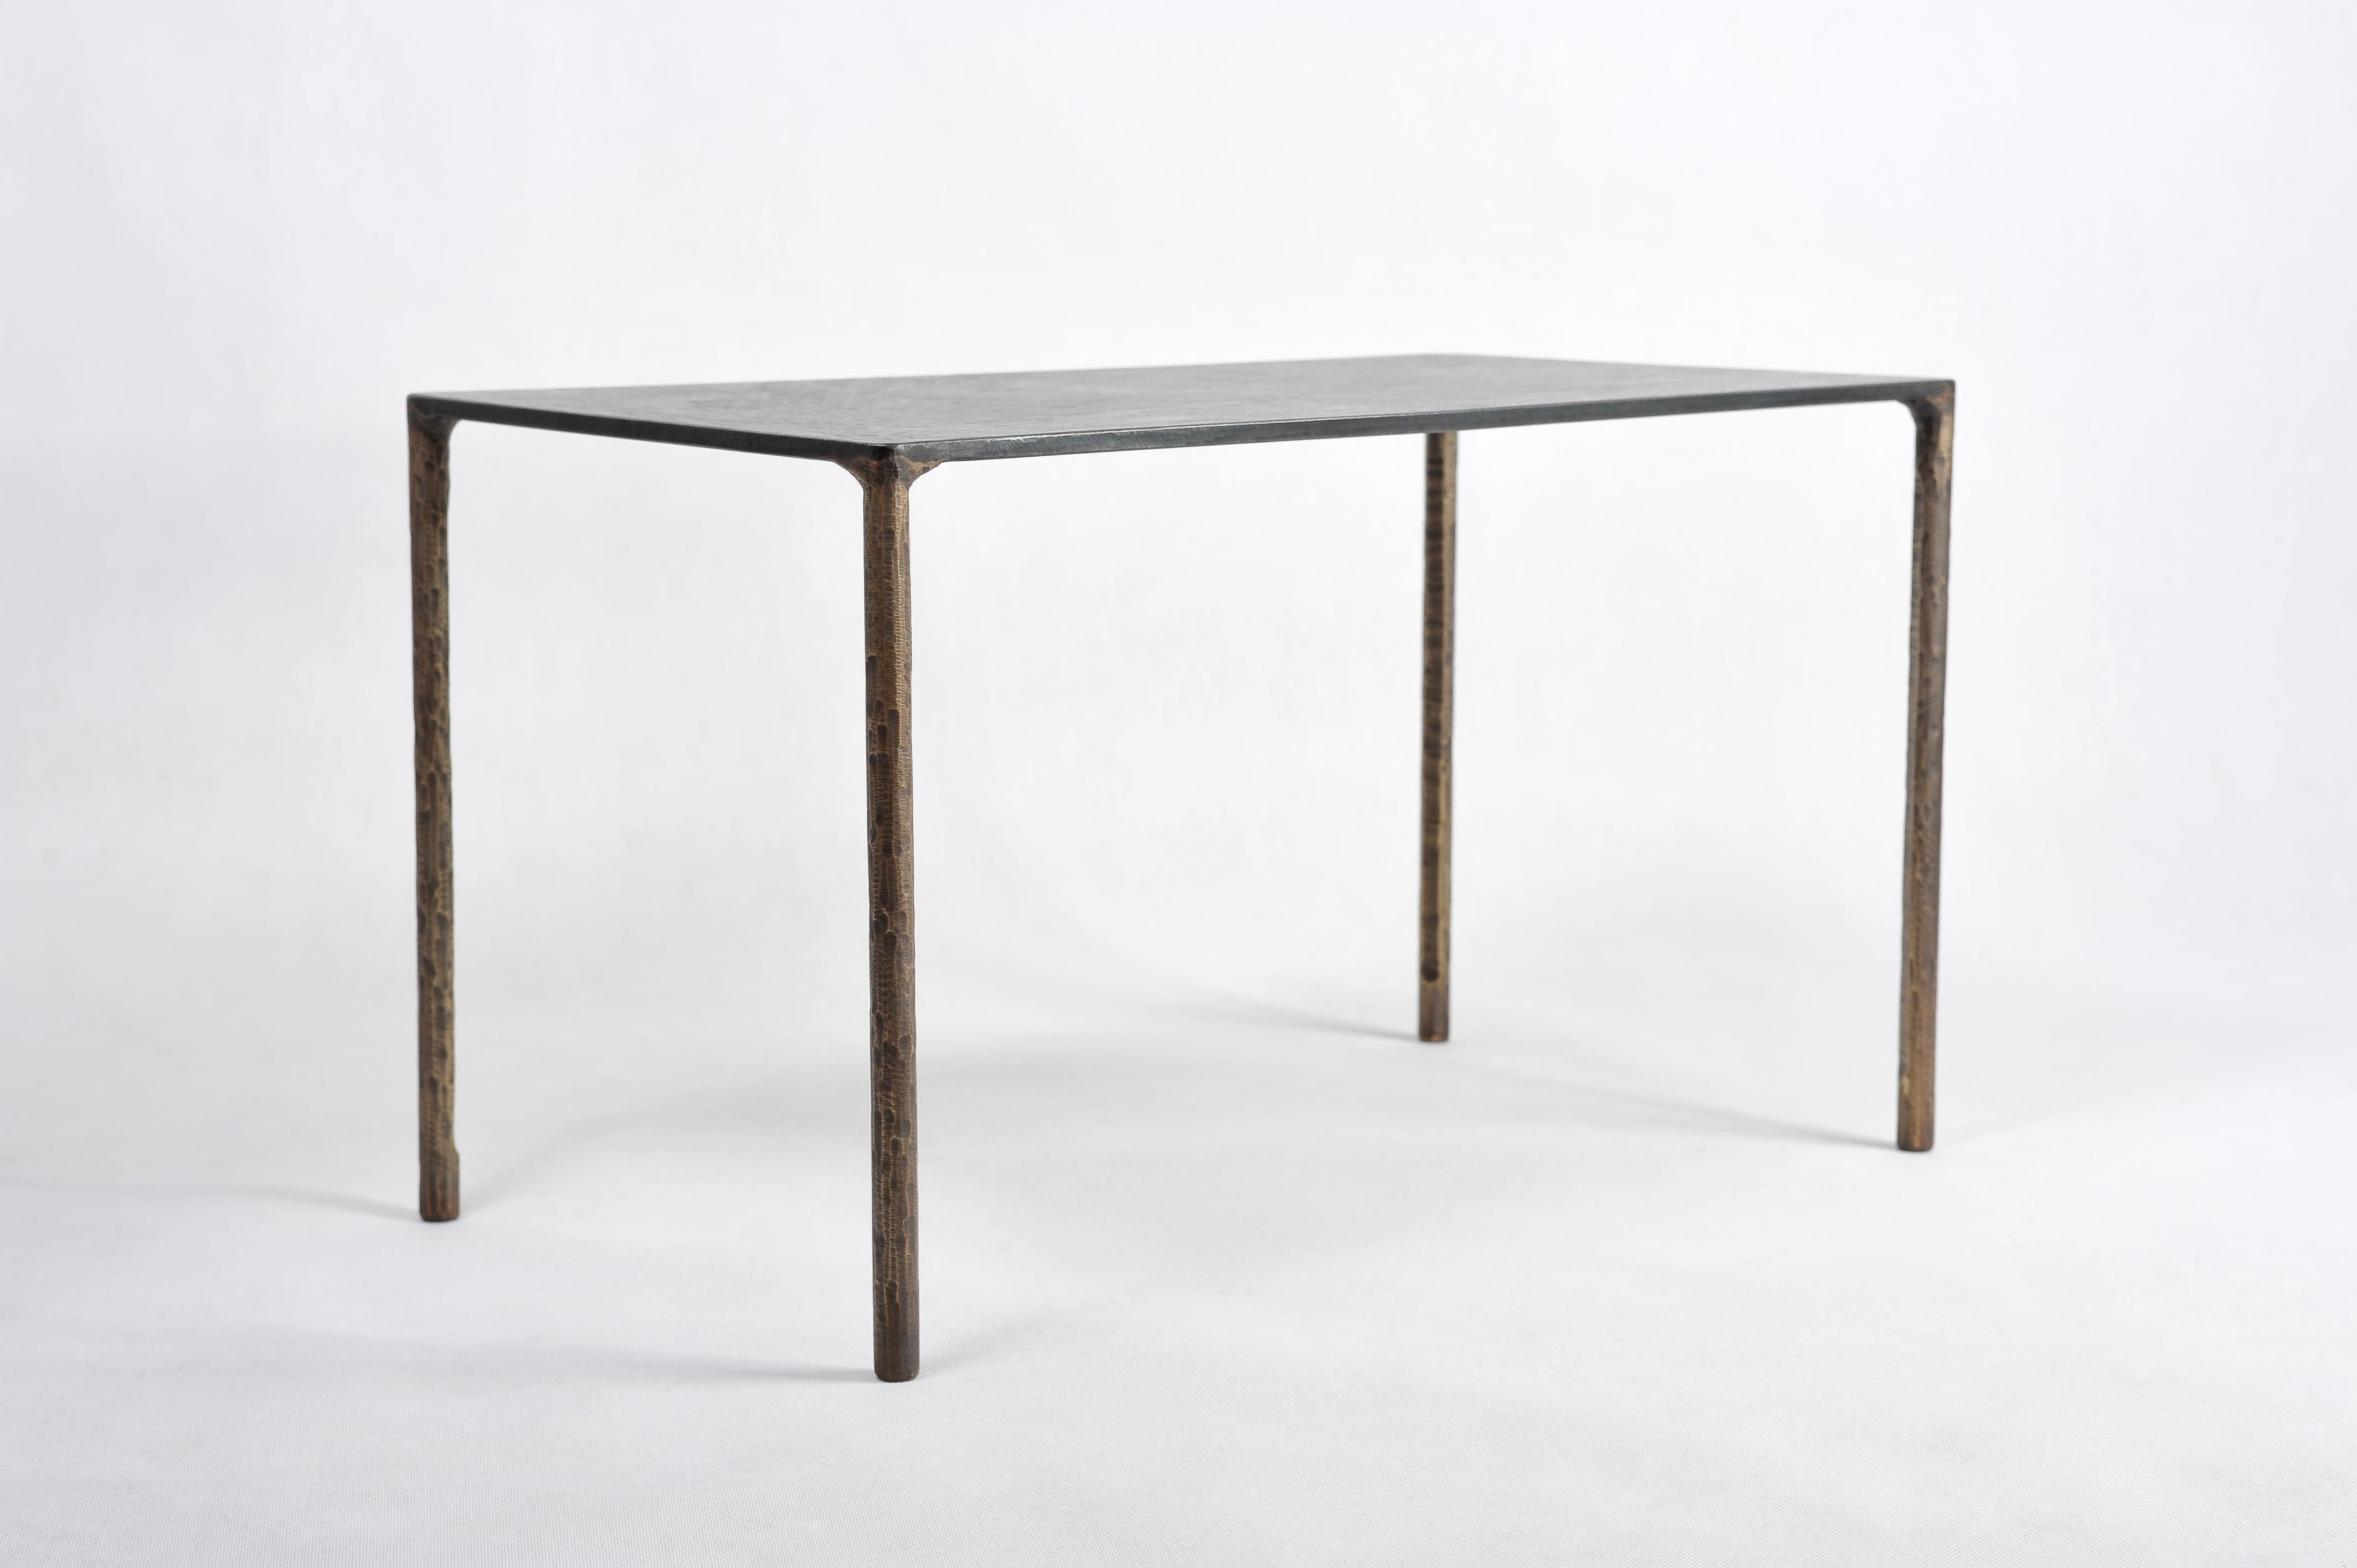 Brass side table signed by Lukasz Friedrich
Textured side or coffee table
Materials: Legs, patinated brass; top, patinated and waxed steel
Dimensions: D 38 cm, L 68 cm, H 40 cm
Signed and dated

Lukasz Friedrich (born 1980), lives and works in